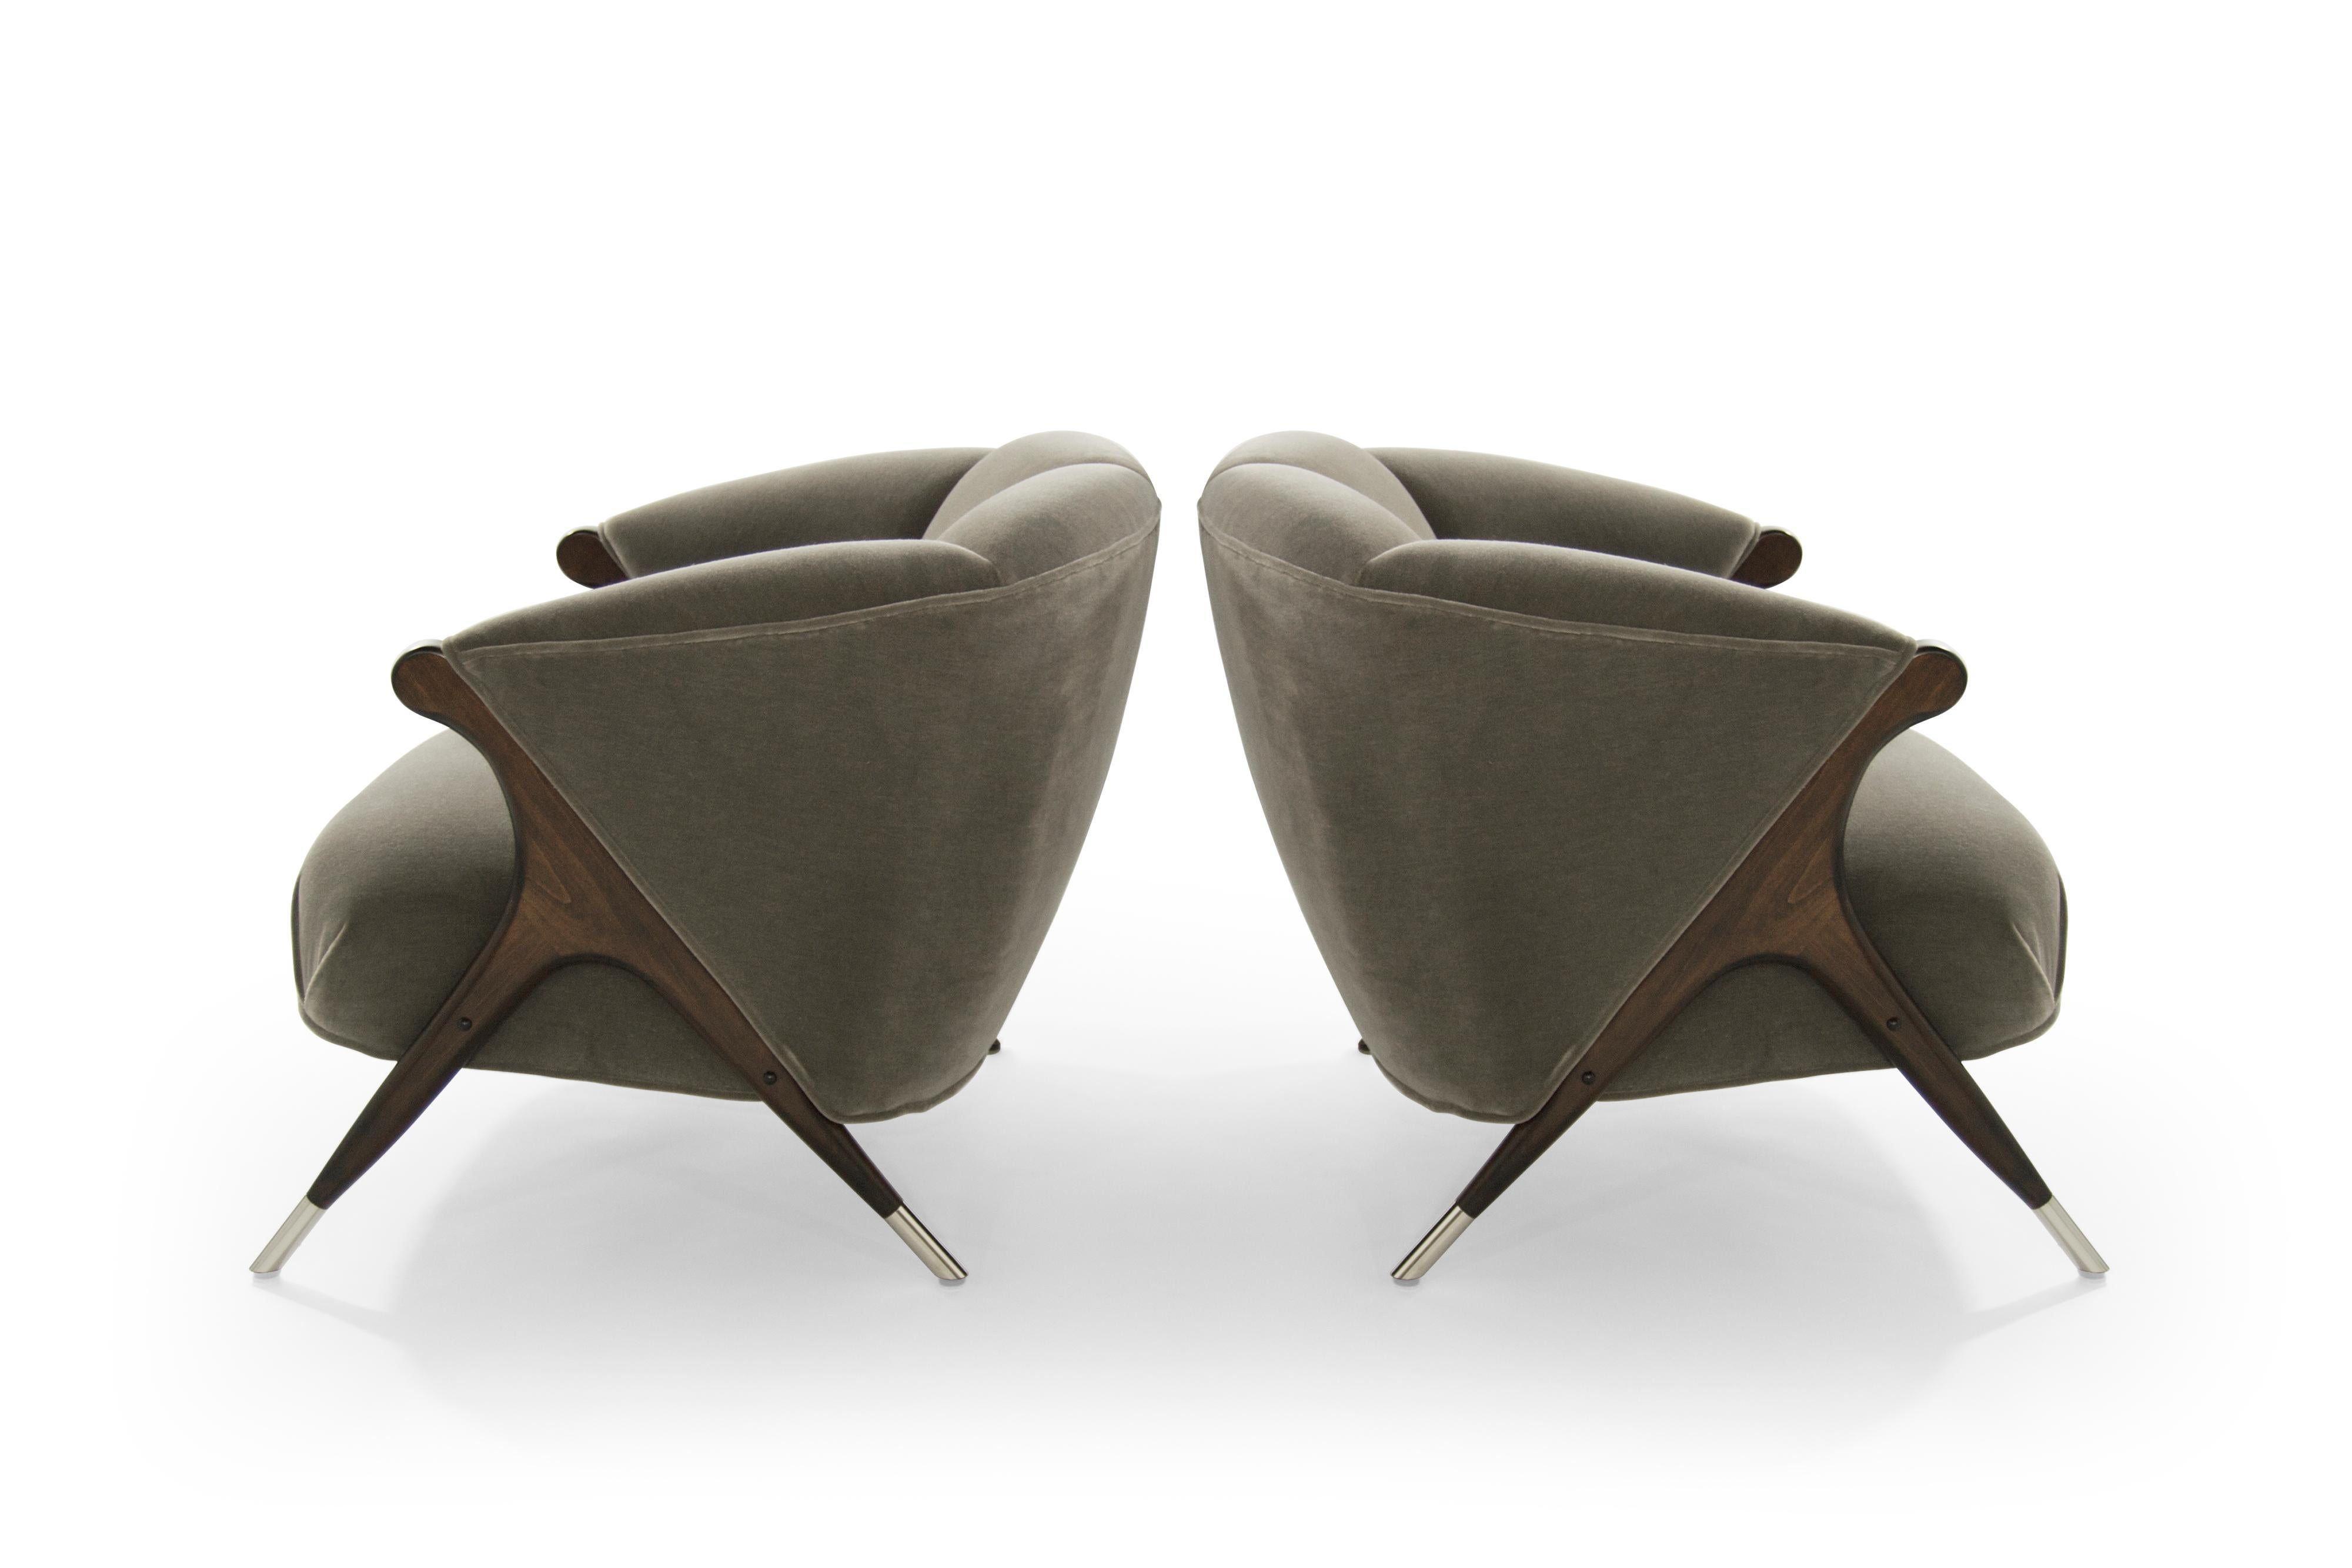 American Modernist Karpen Lounge Chairs in Charcoal Mohair, 1950s